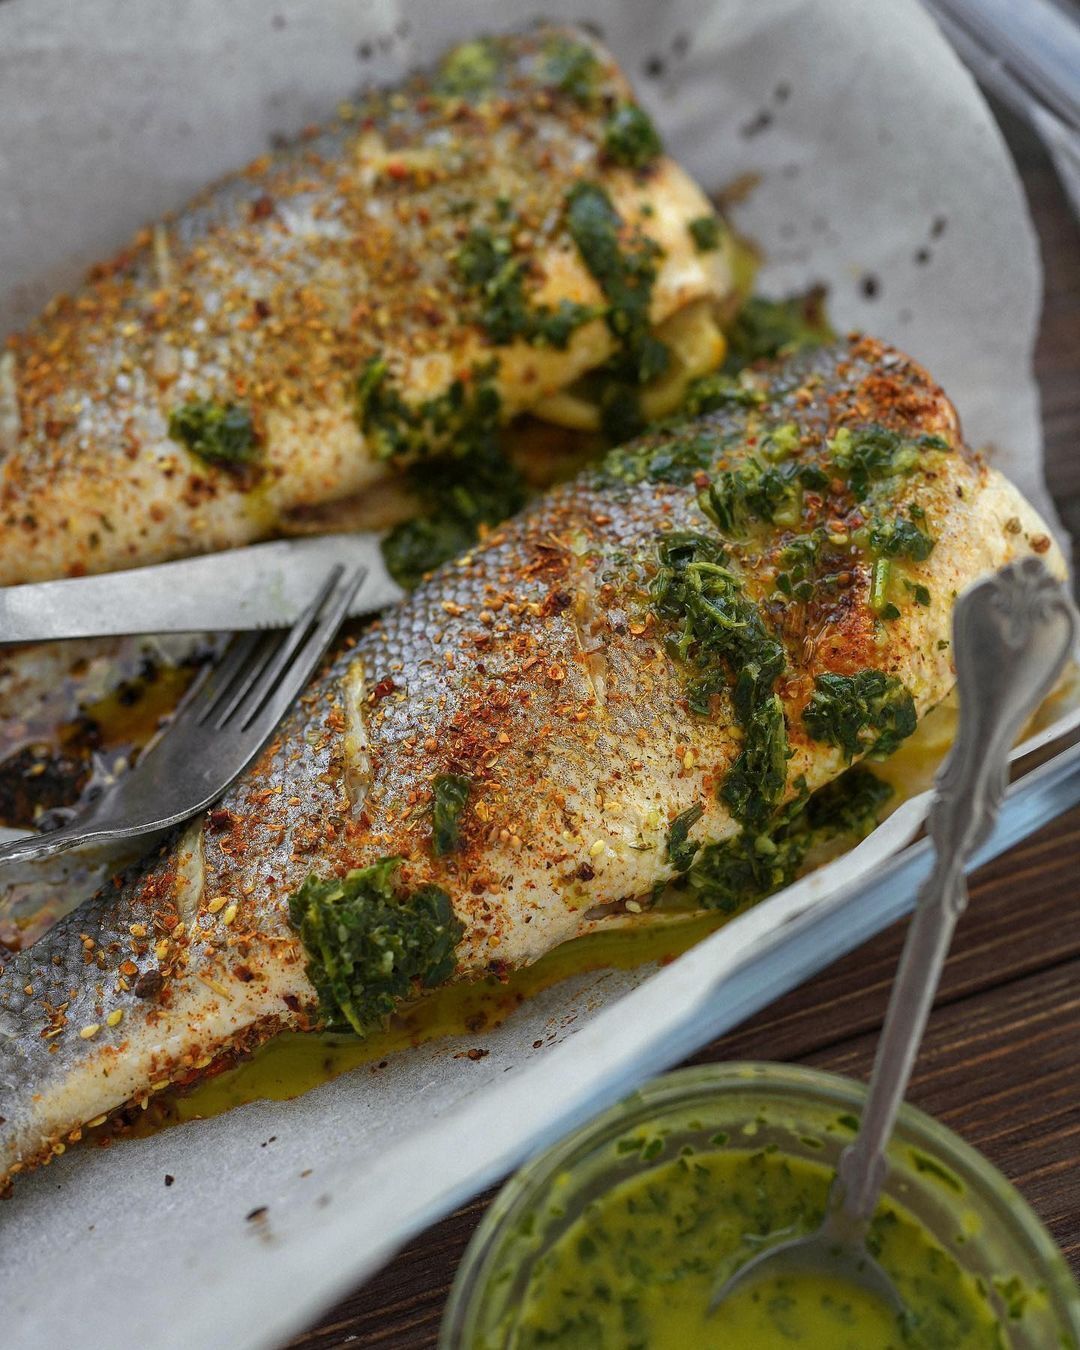 How to cook fish deliciously